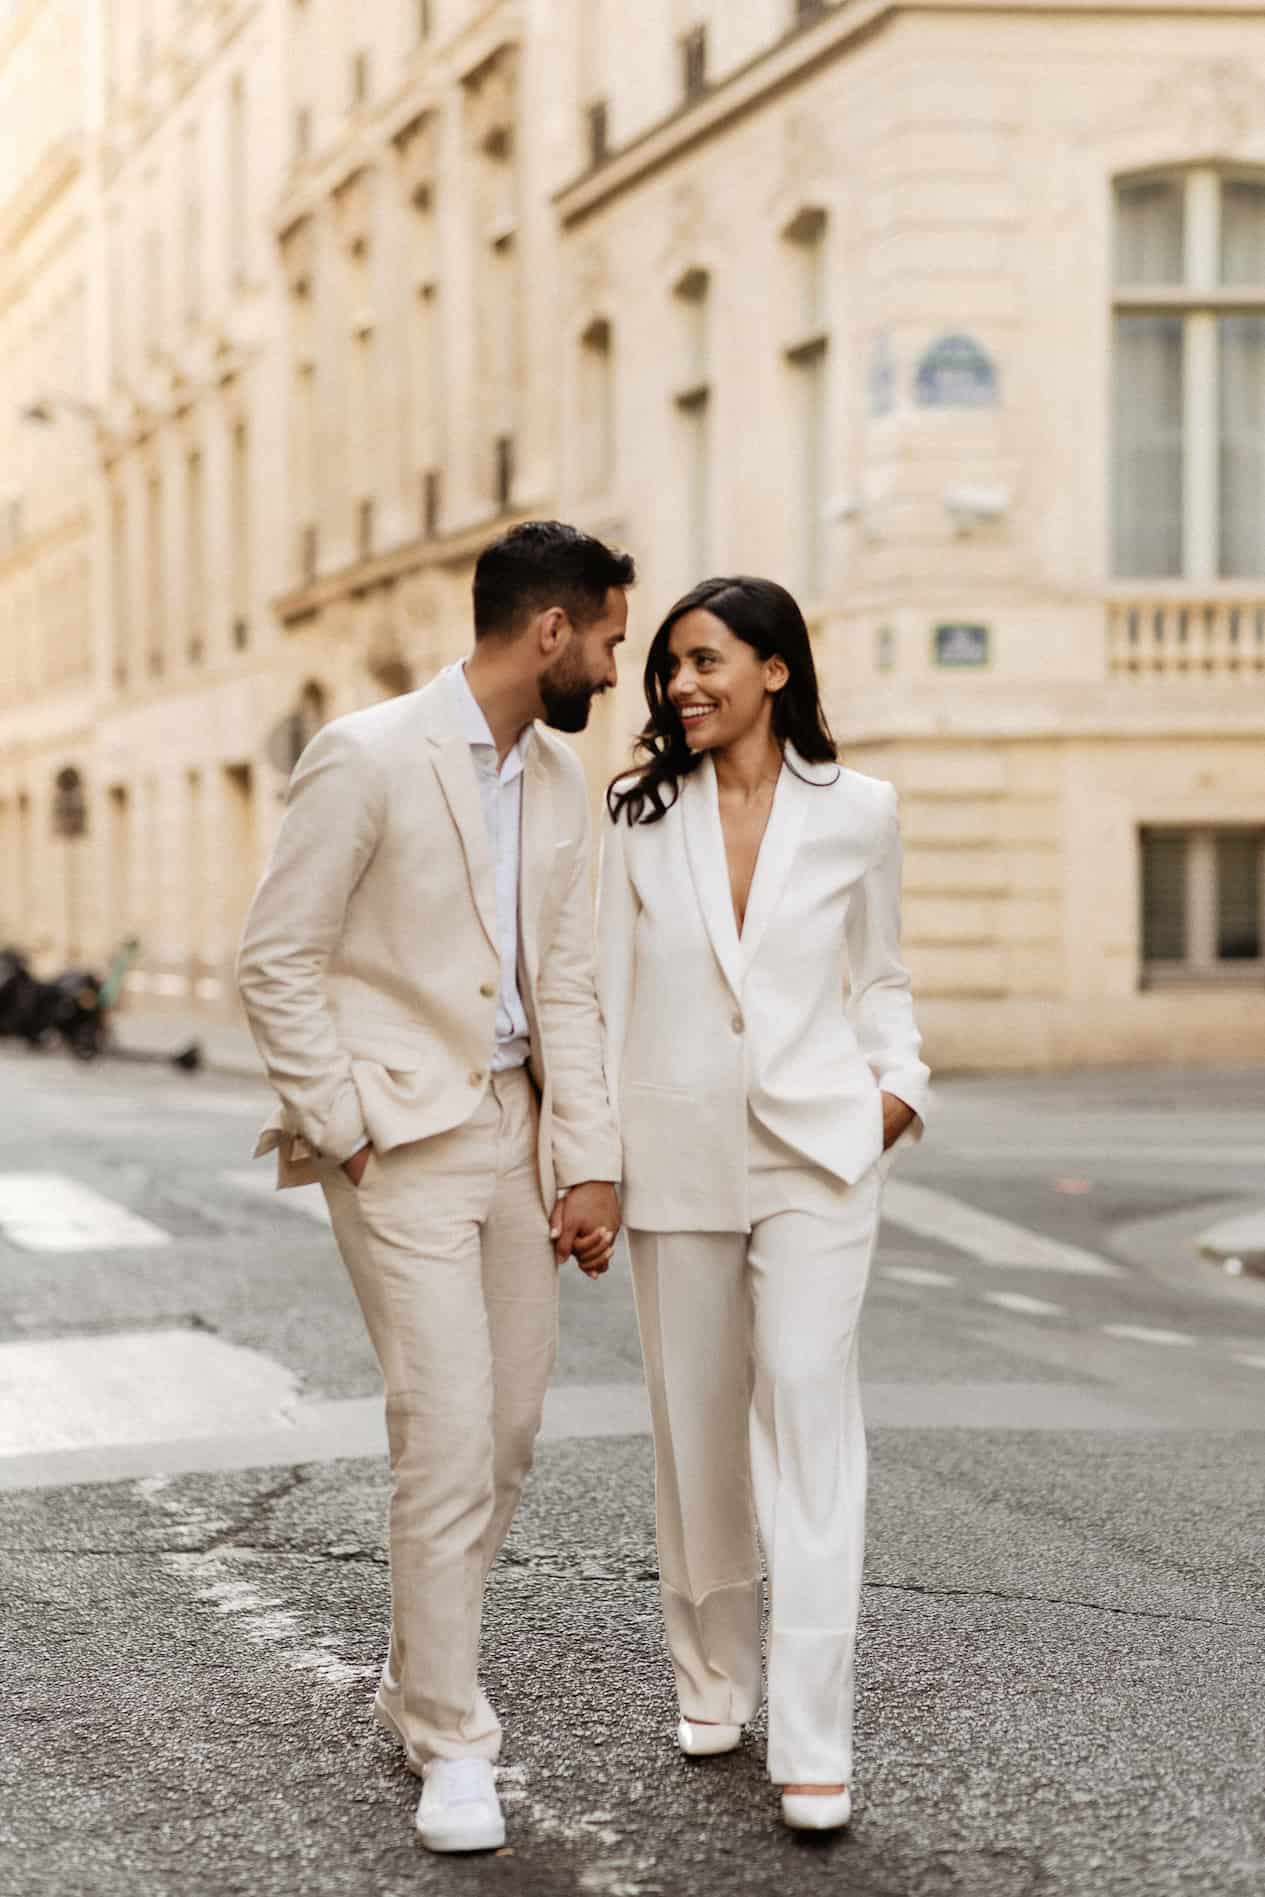 Young man and young woman walk in the street holding hands wearing neutral-colored suits.